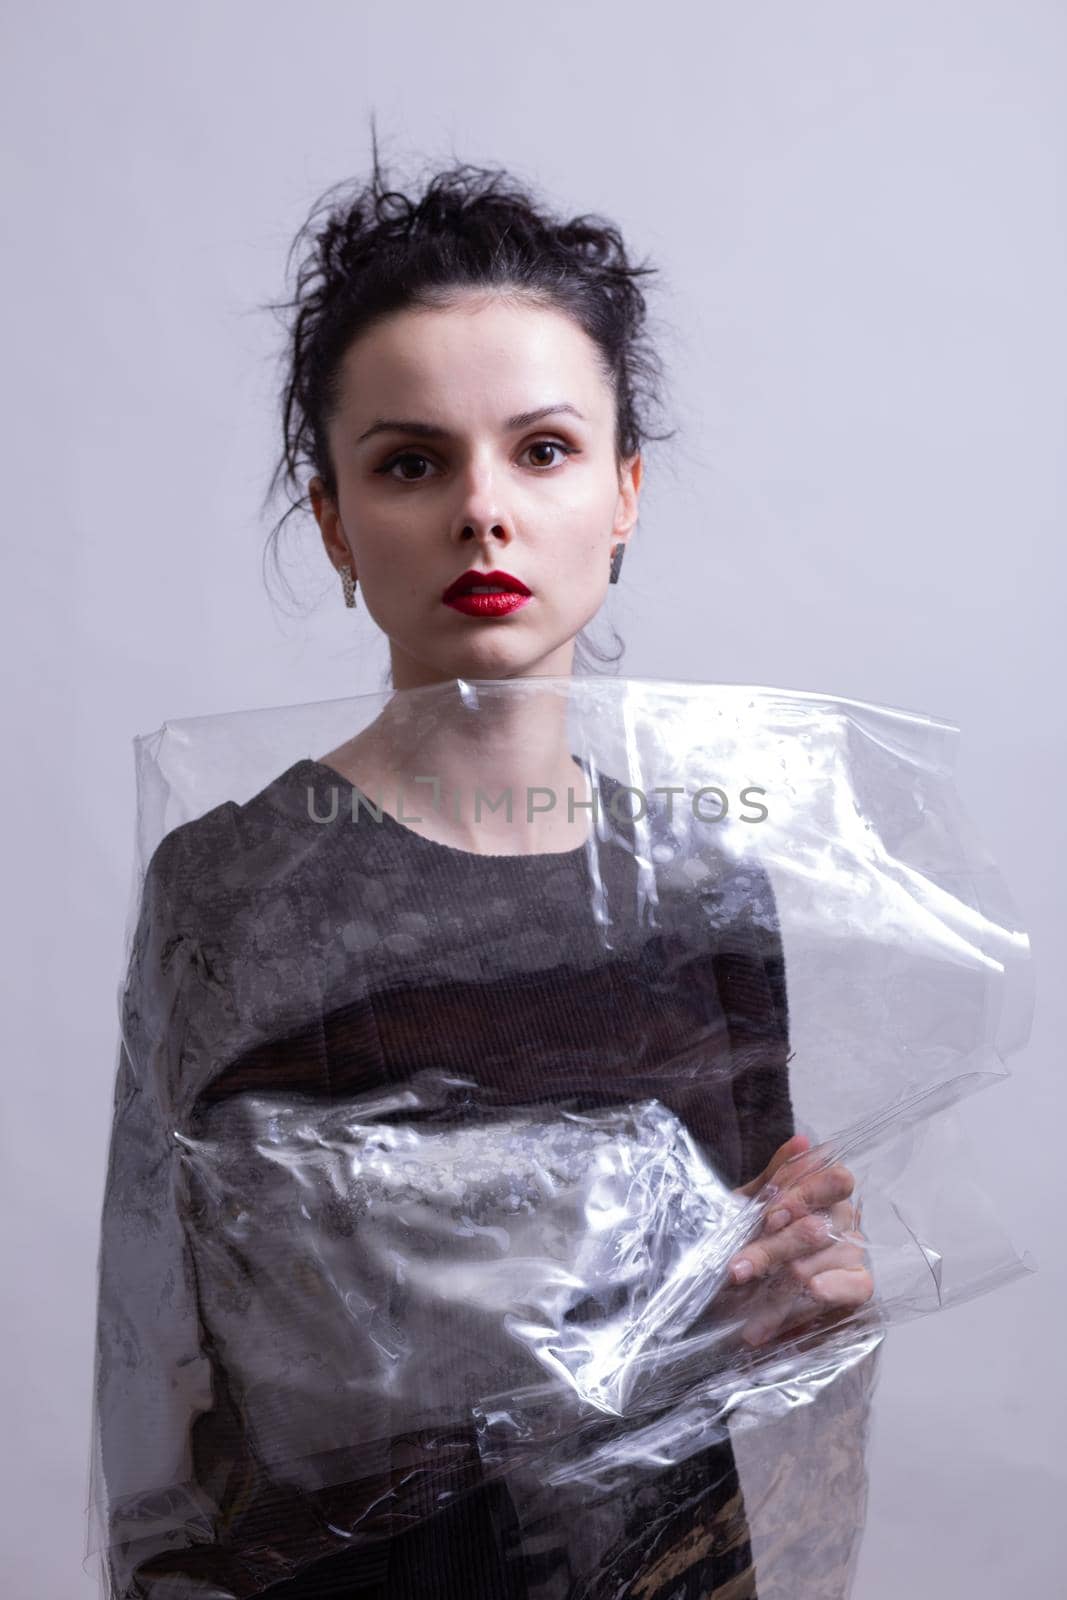 woman with red lips wrapped in plastic wrap. High quality photo